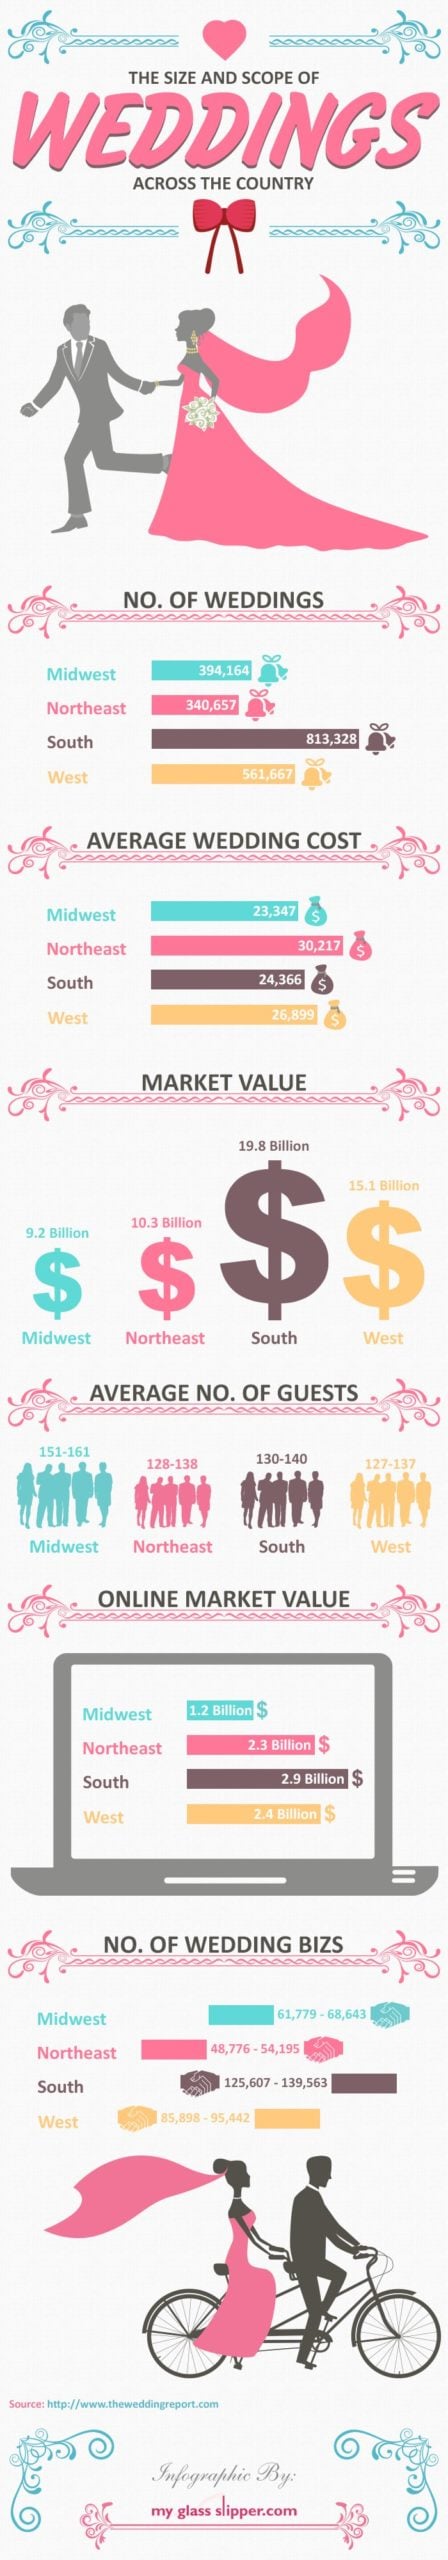 where in the US is big business for wedding venues